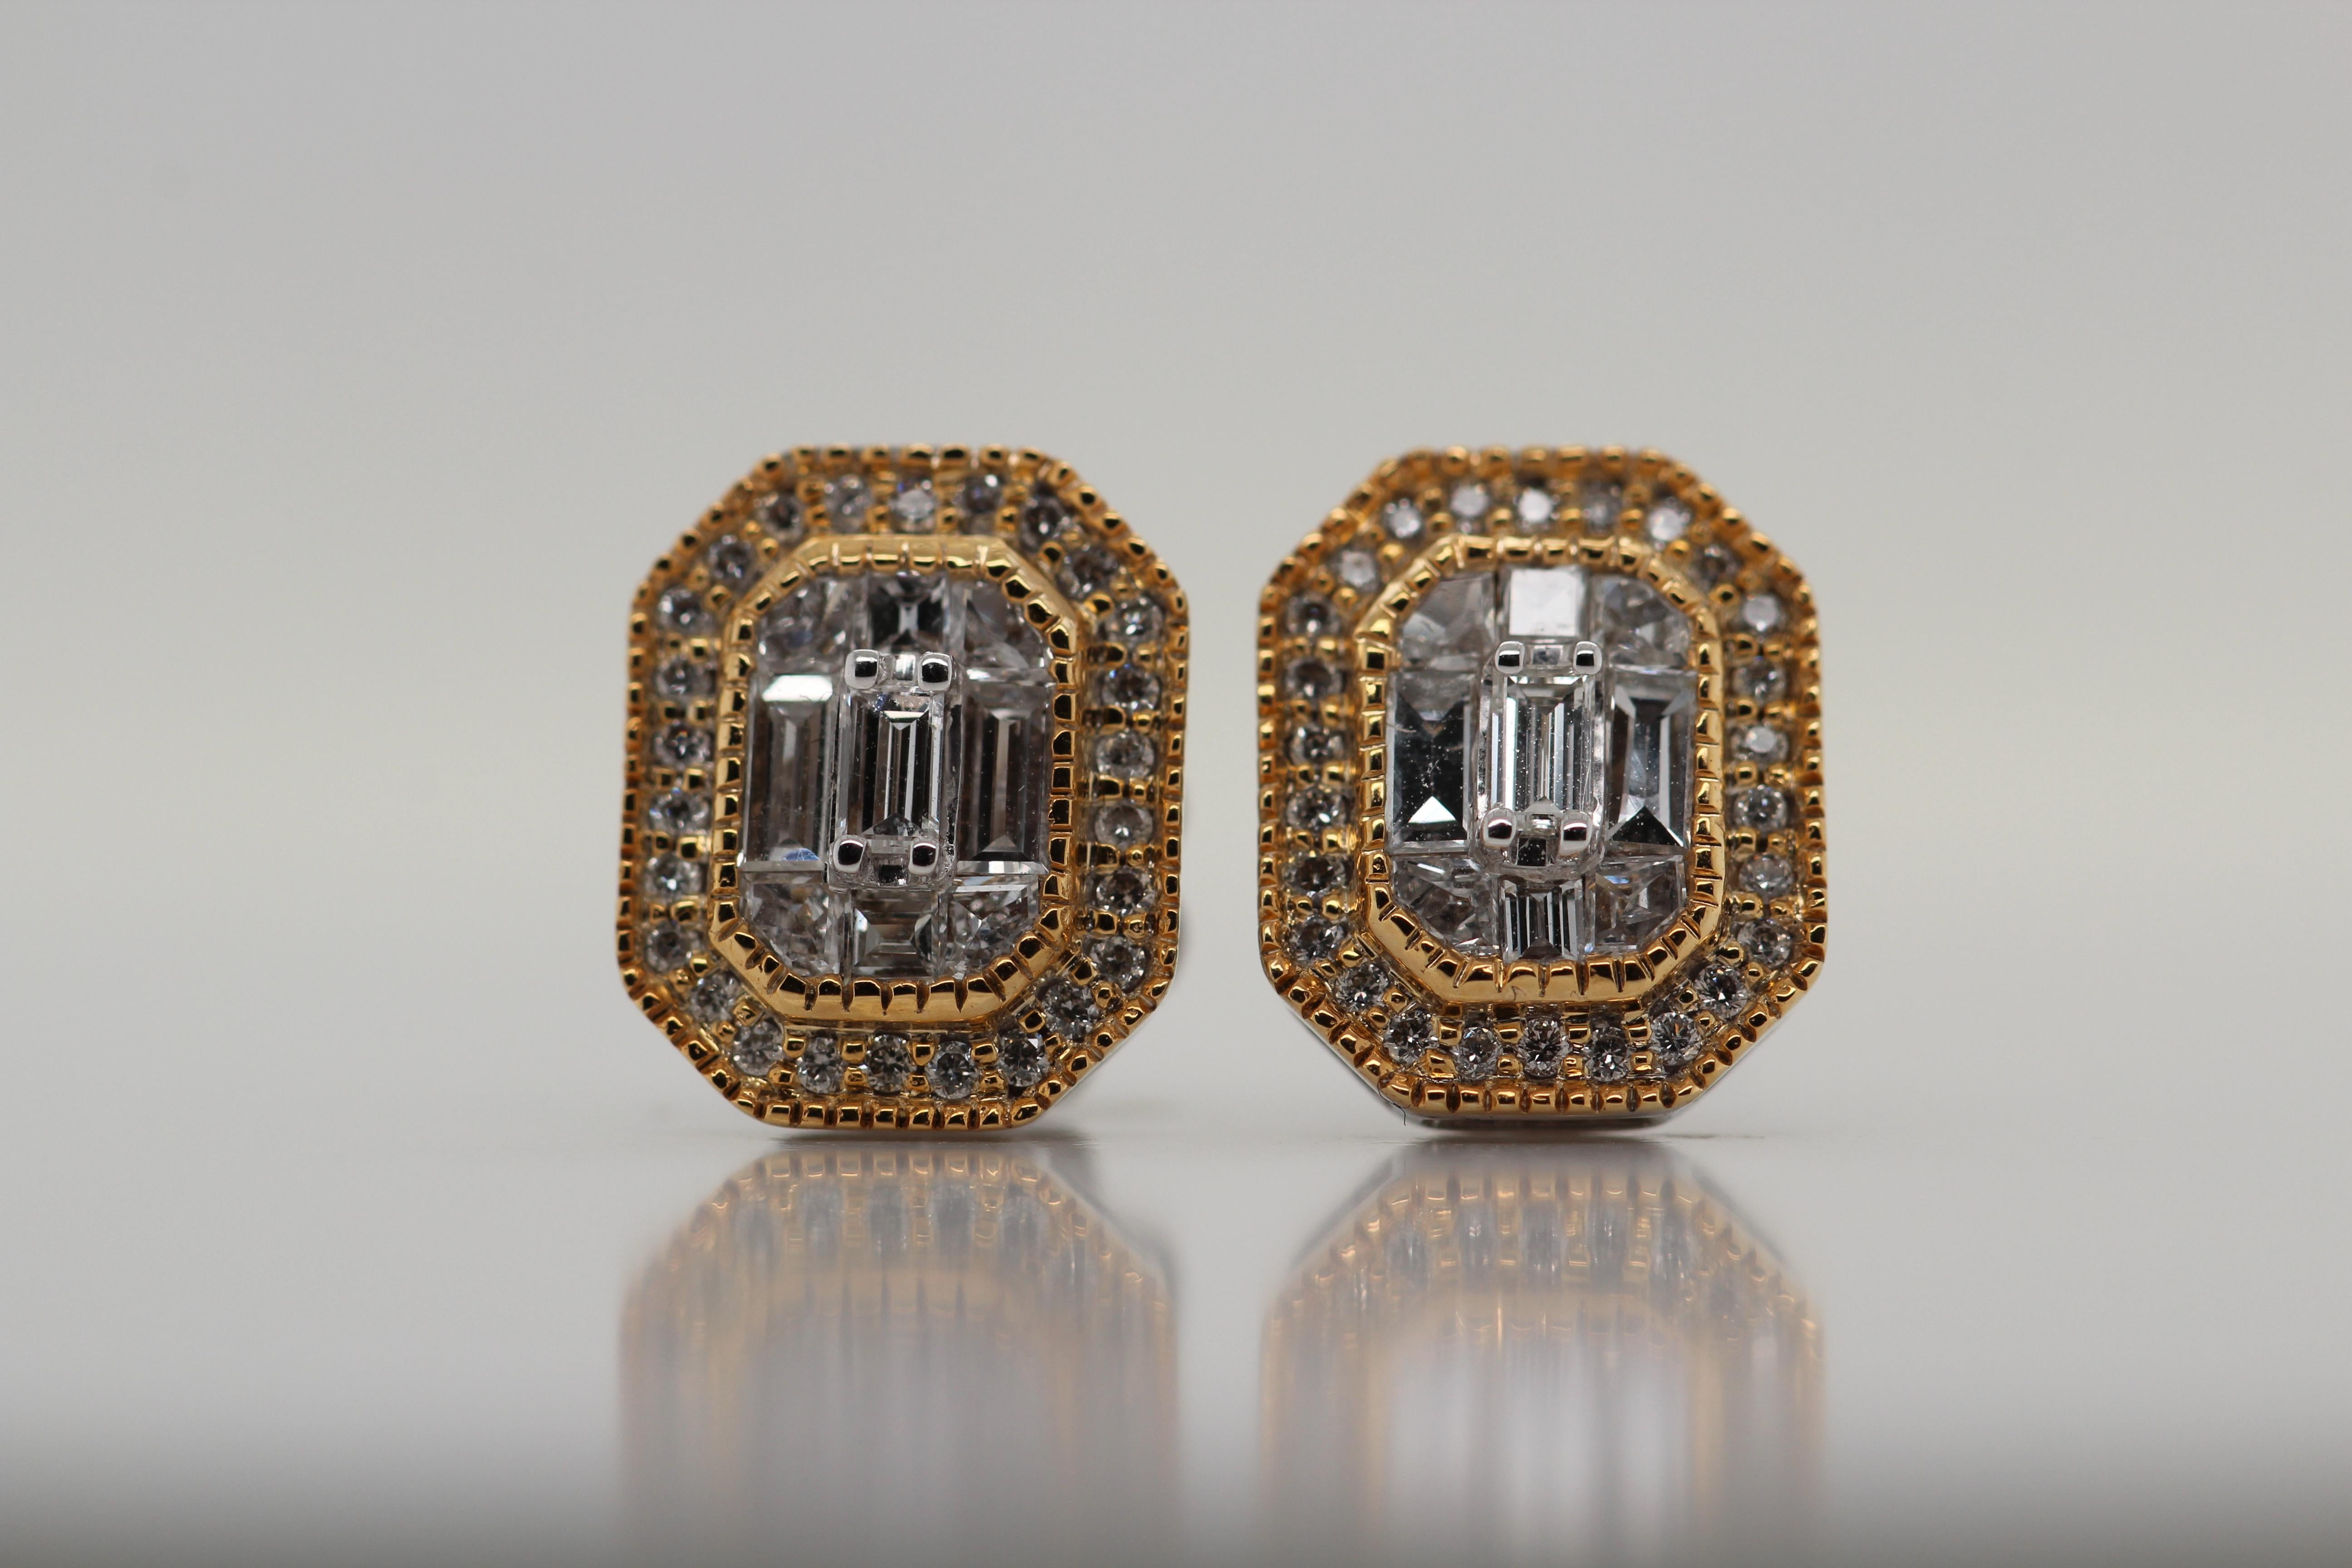 A new 18 Karat pie cut diamond earring. The pie cut is about 0.62 carat and the total diamond weight of the earrings are 0.80 carat. The weight of the earrings is 4.54 grams.